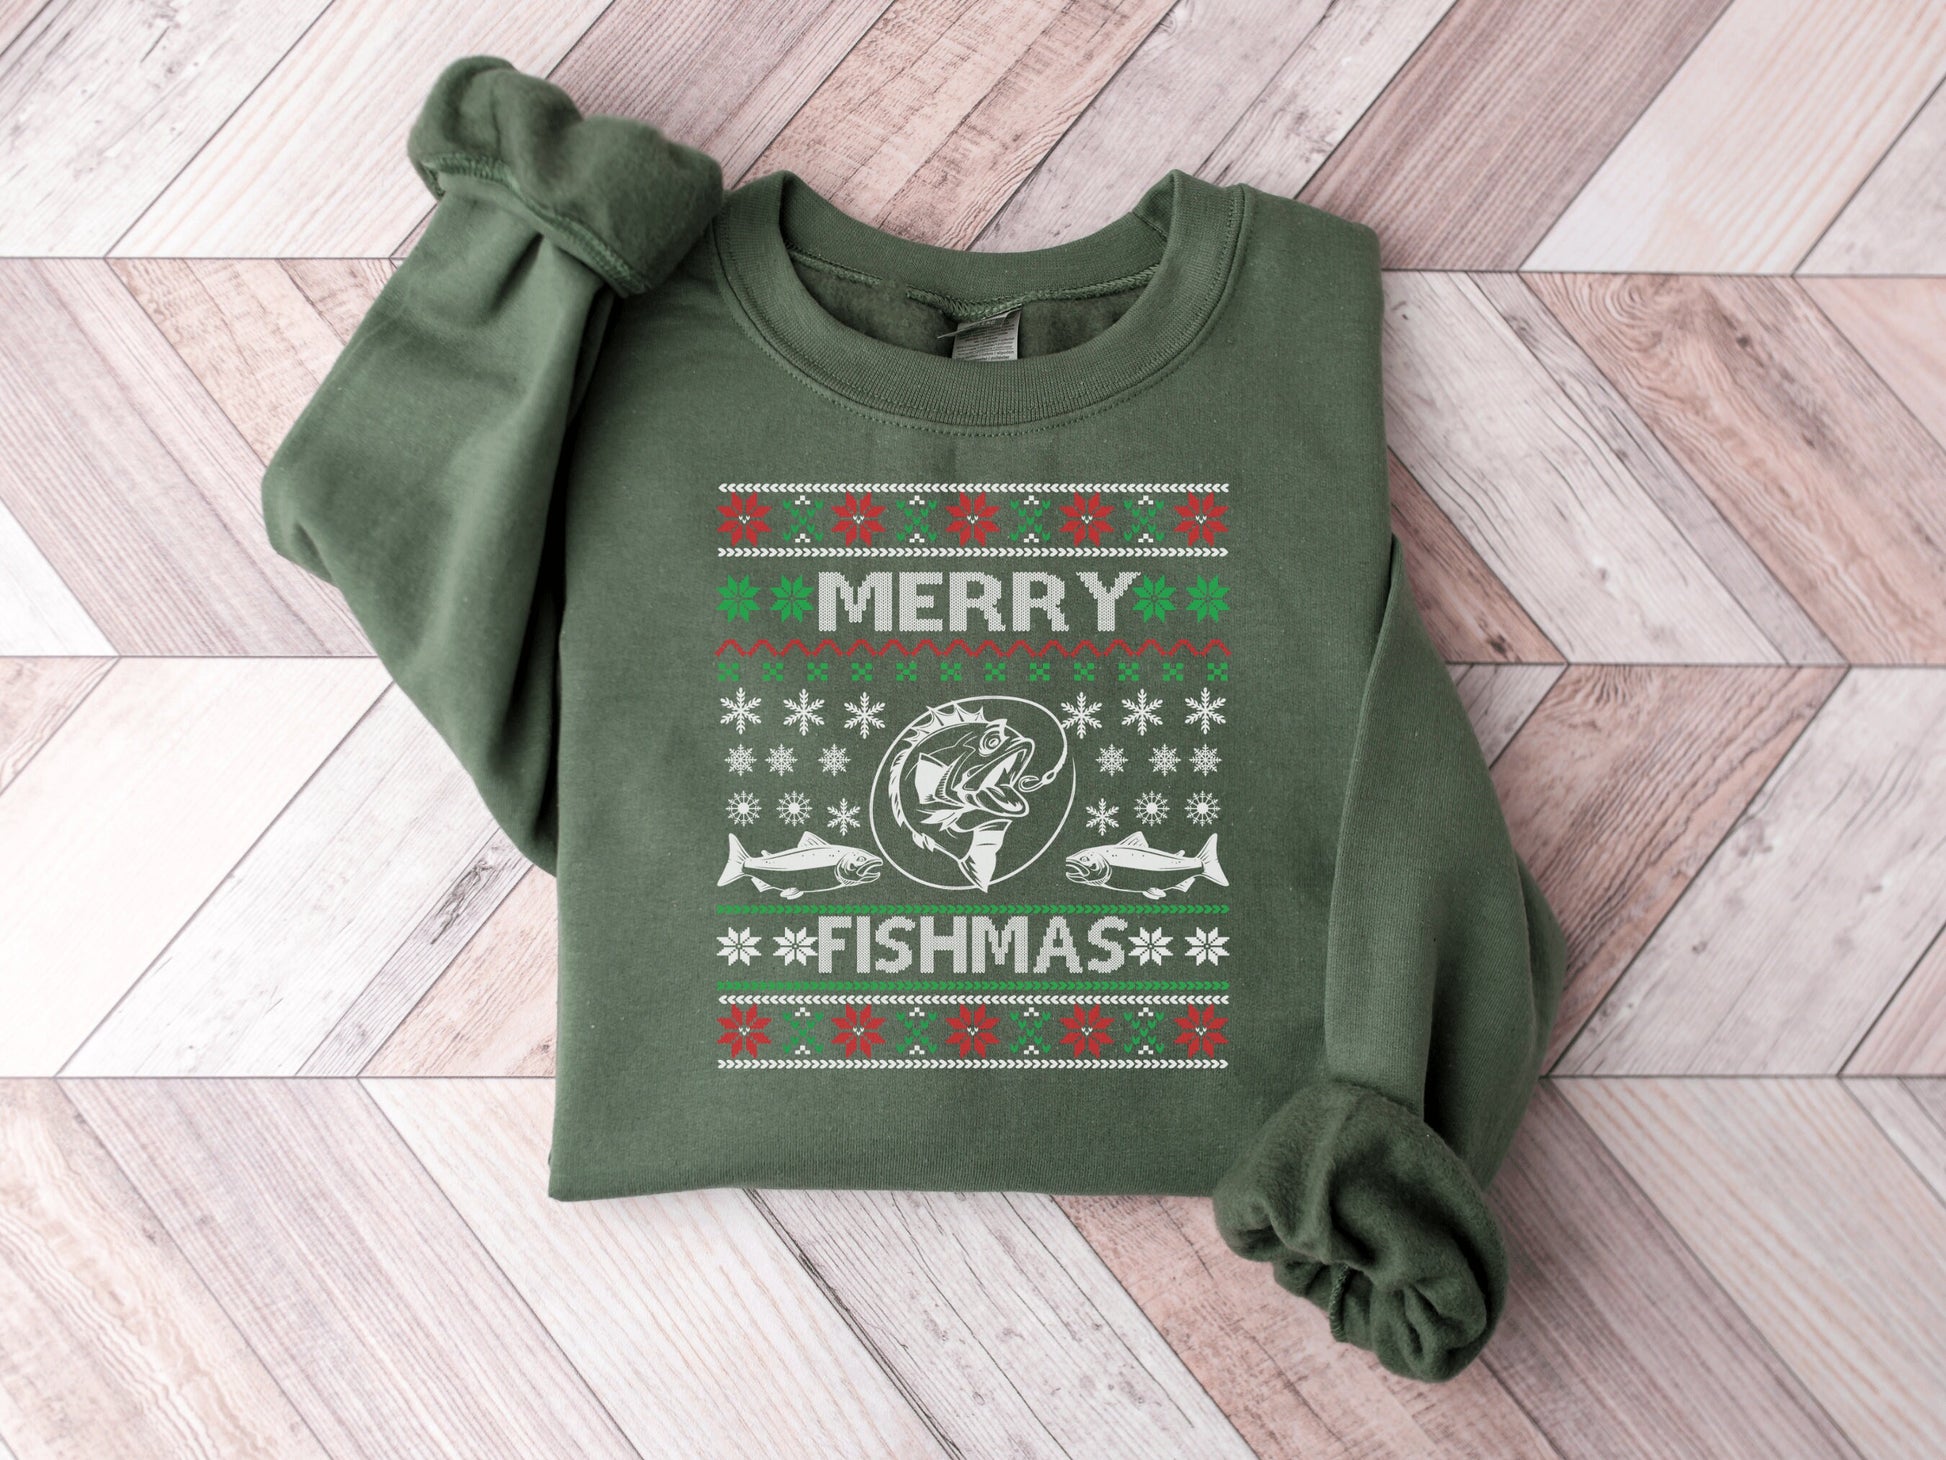 Fishing Gifts for Men, Ugly Christmas Sweater for Men, Merry Fishmas Ugly Christmas Sweater, Merry Fishmas Fishing Ugly Christmas Sweater - Mardonyx Red / S